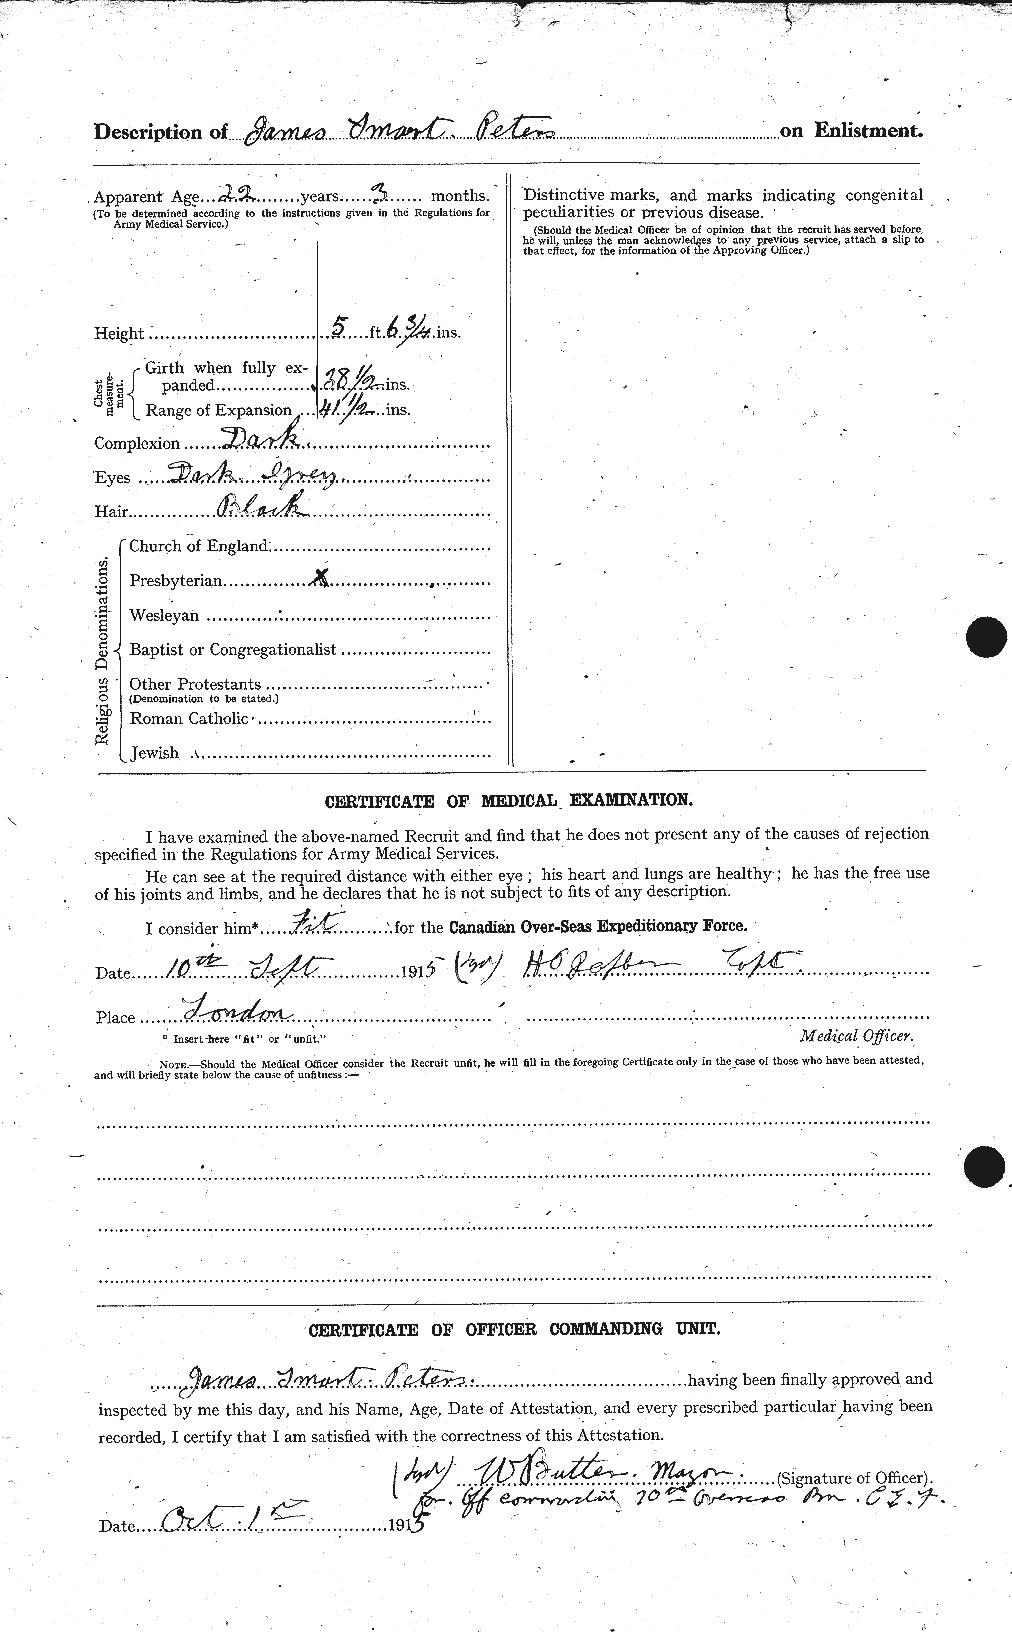 Personnel Records of the First World War - CEF 575527b